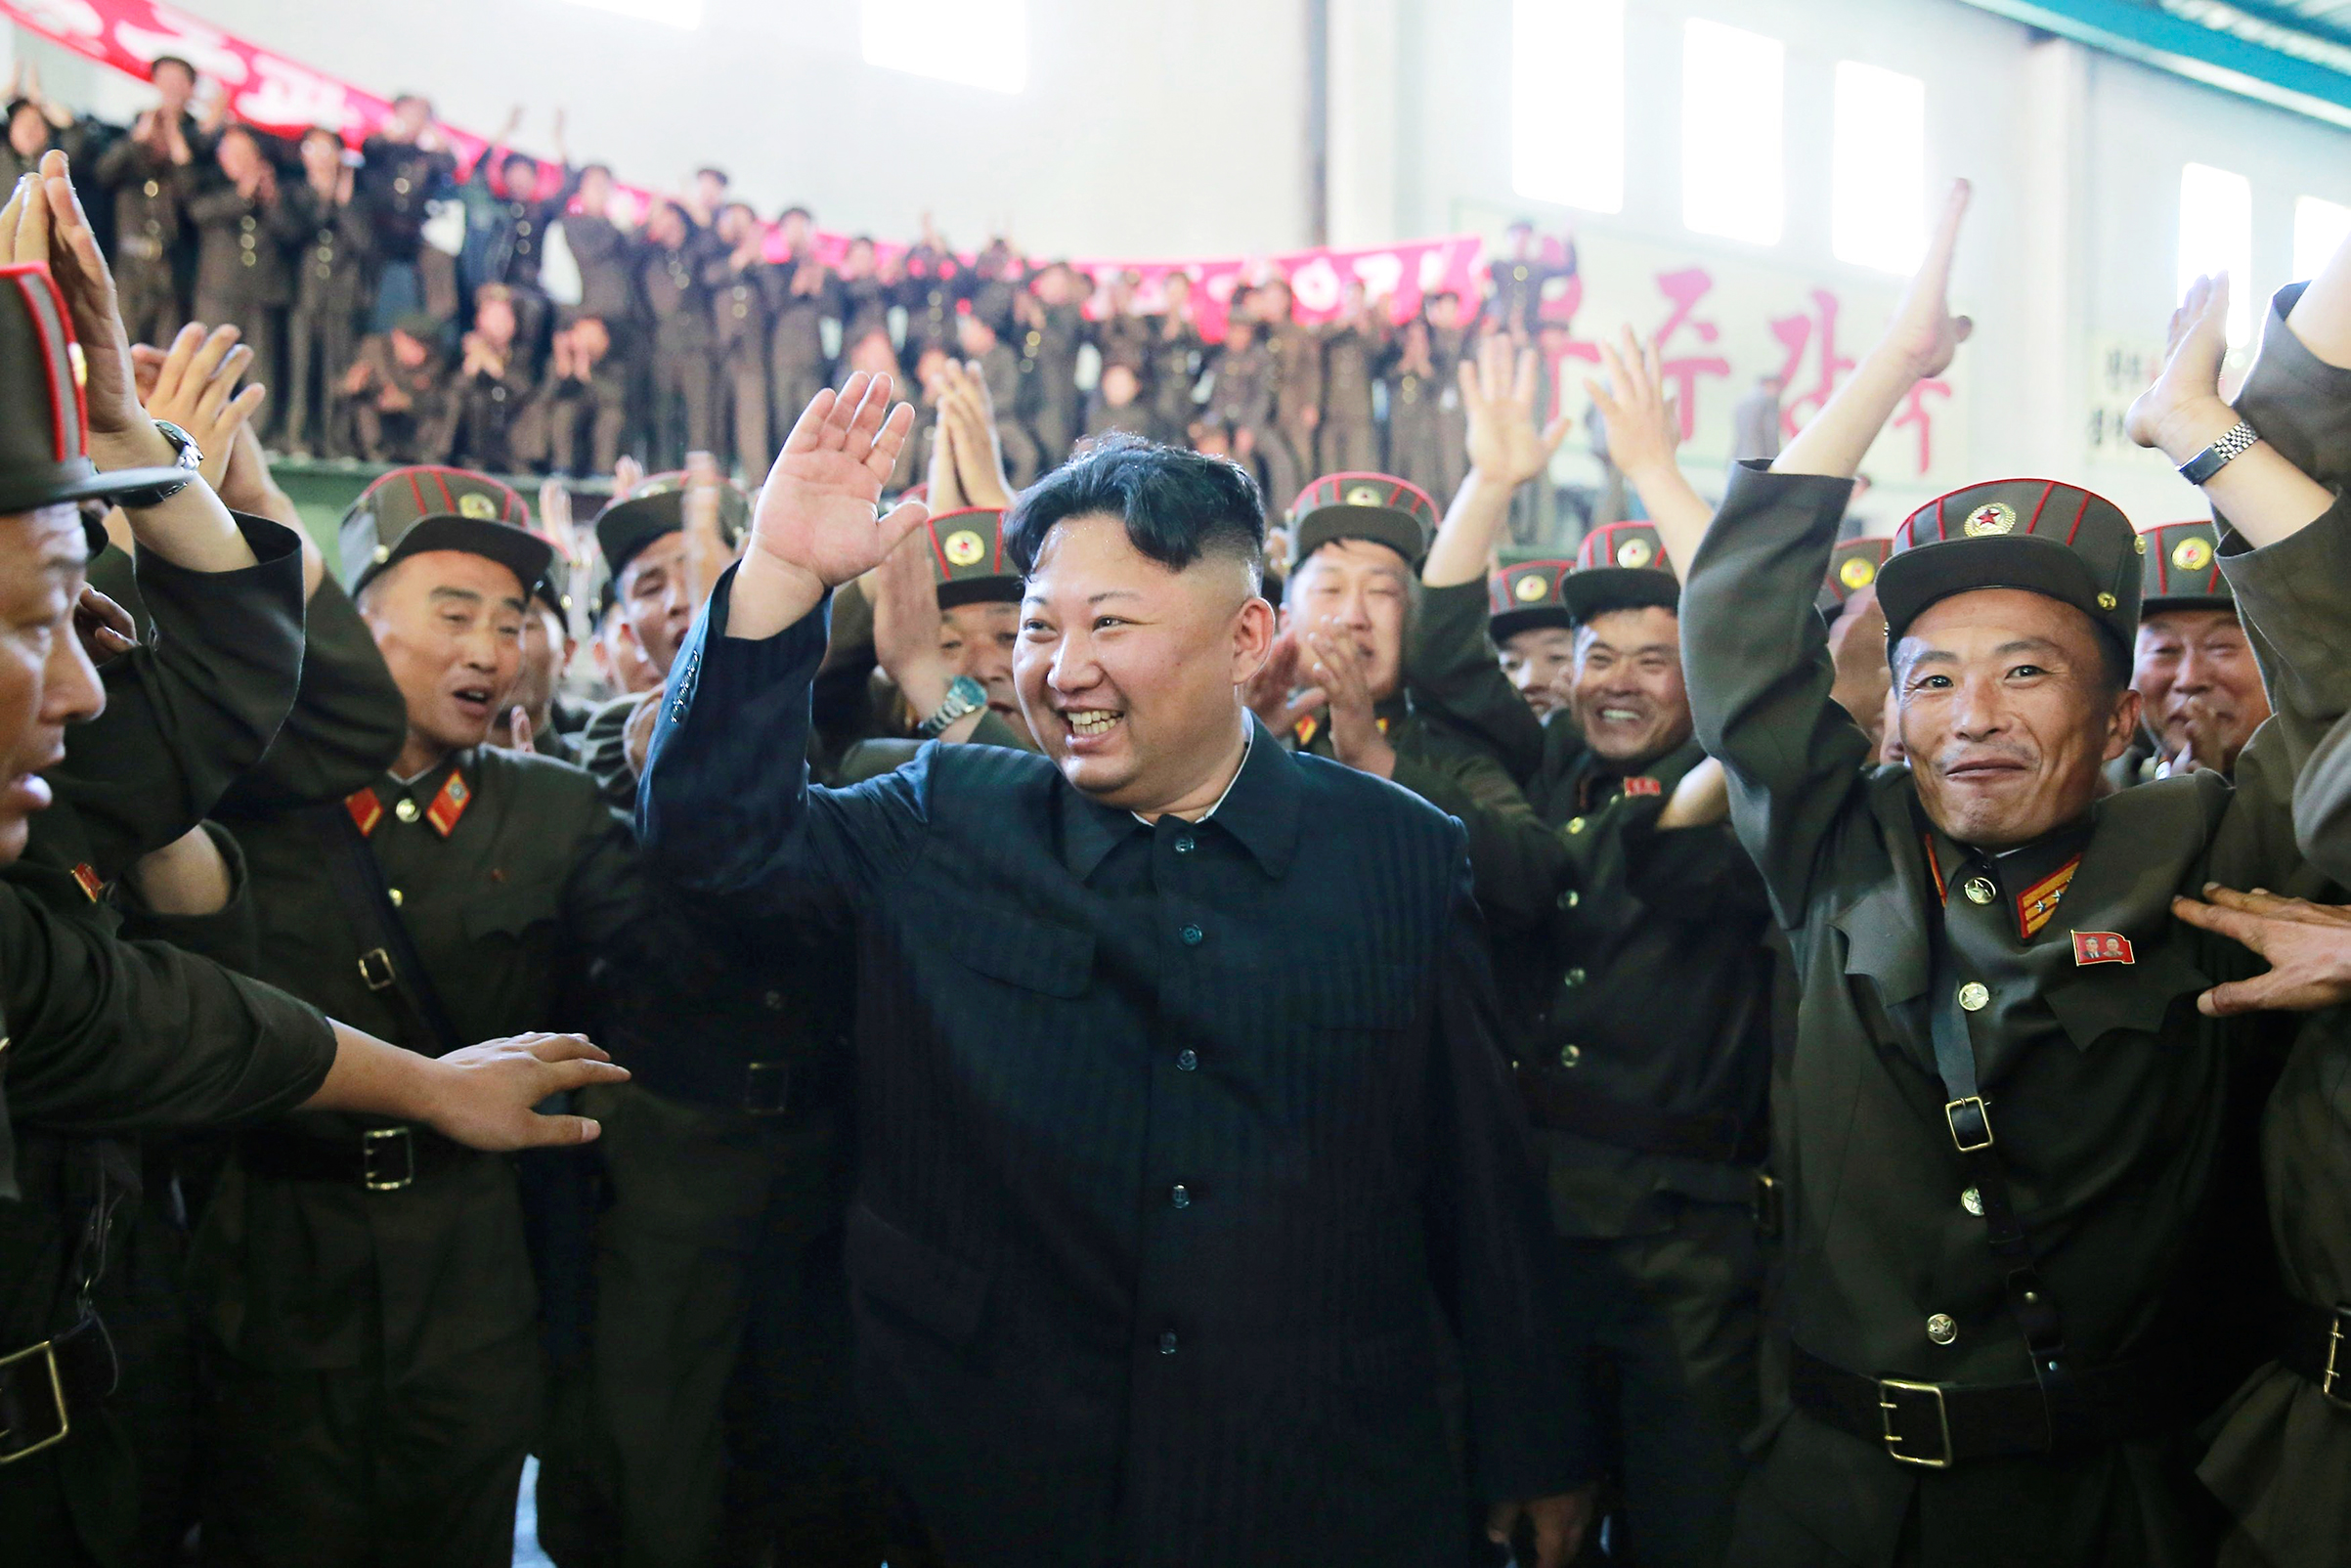 Kim celebrates the test launch of the Hwasong-14 ICBM in this photo released by the North Korean government on July 5 (KCNA/Reuters)